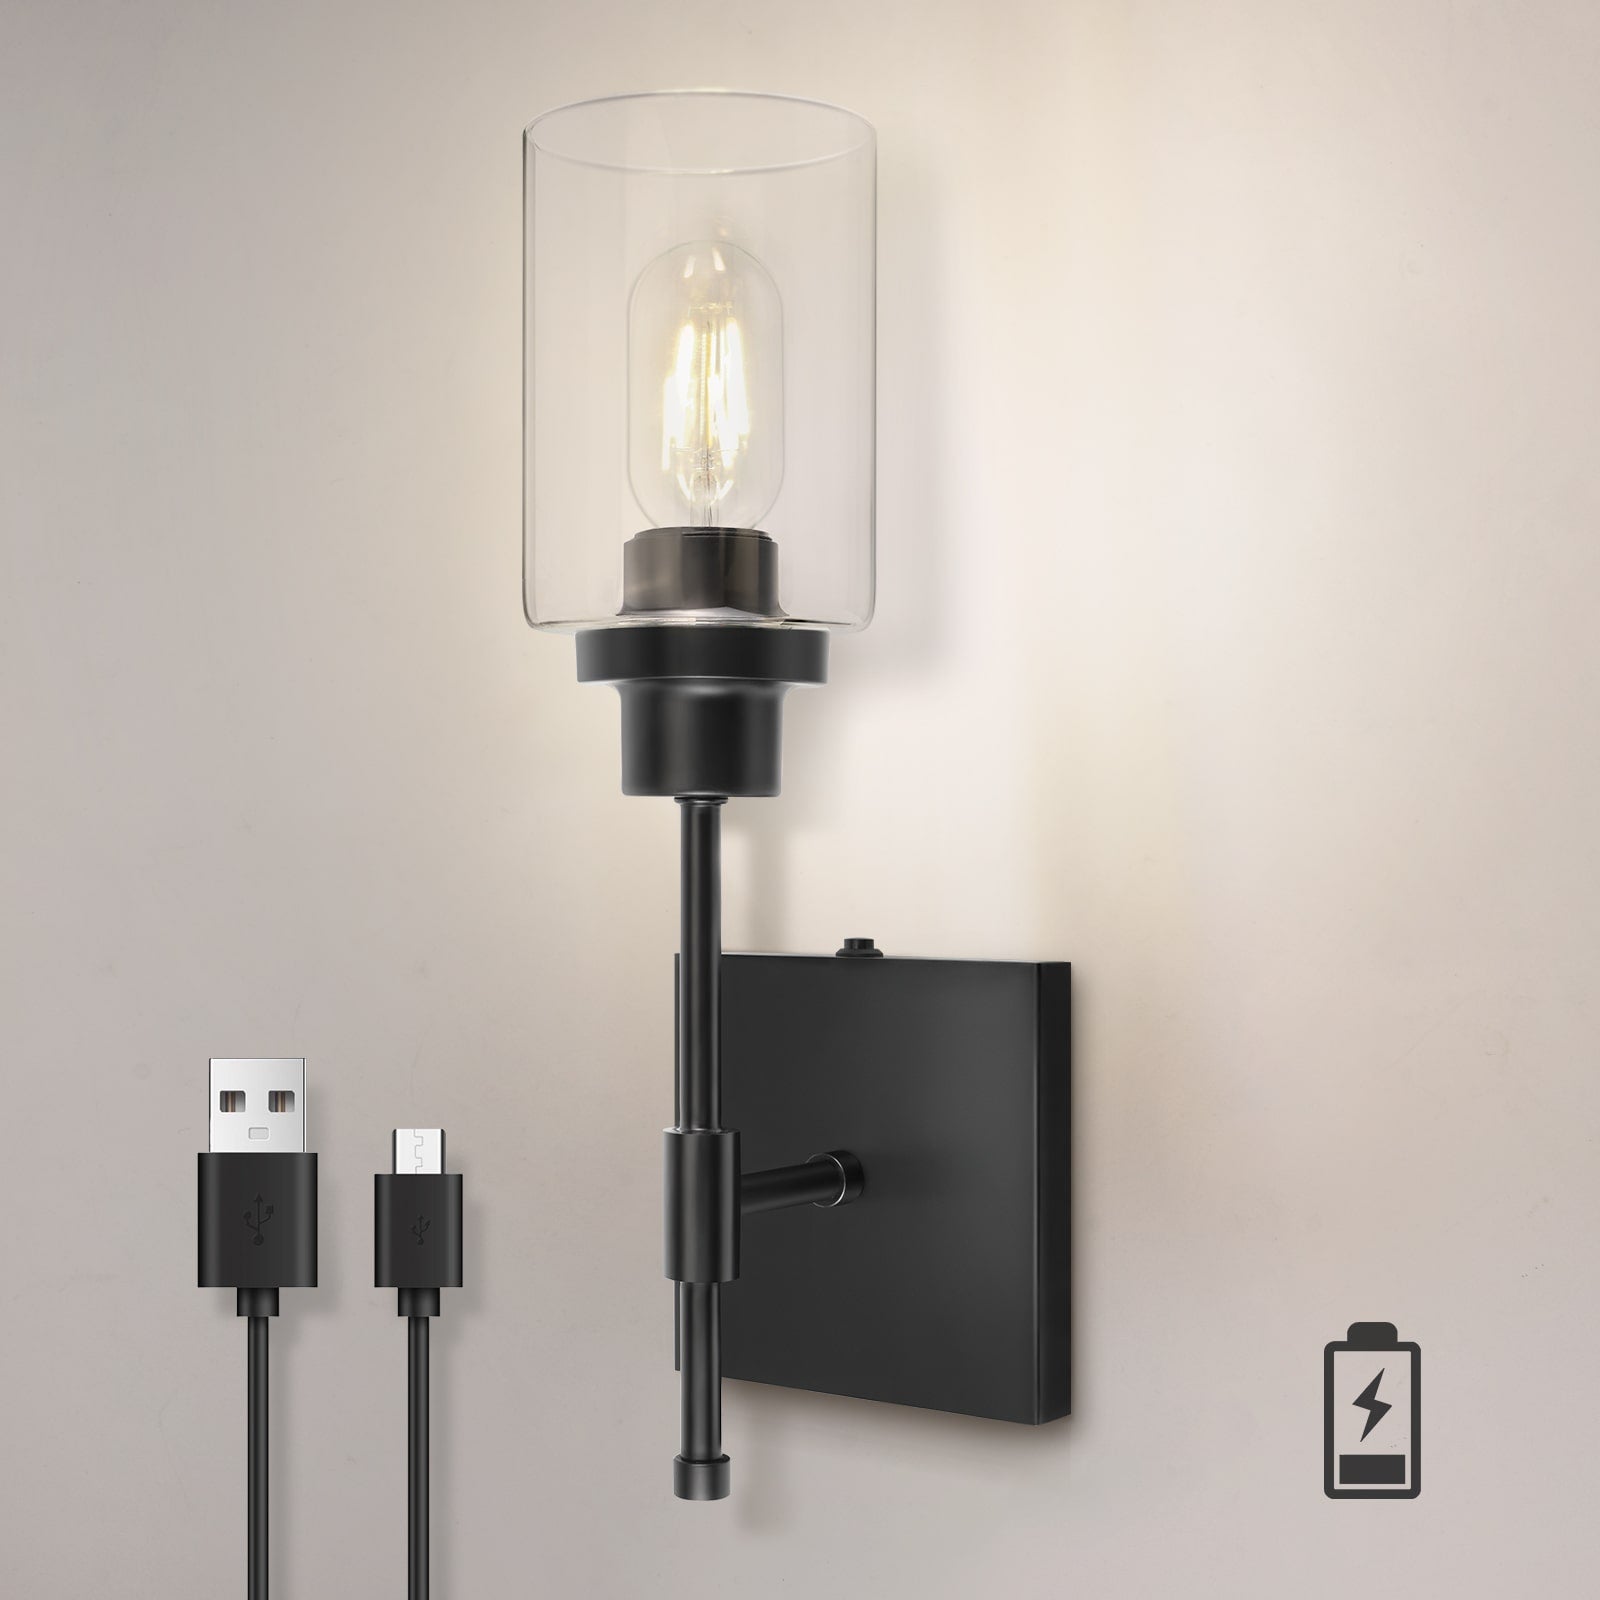 C01 Modern Battery Operated Wall Sconces with Glass Shade for Kitchen